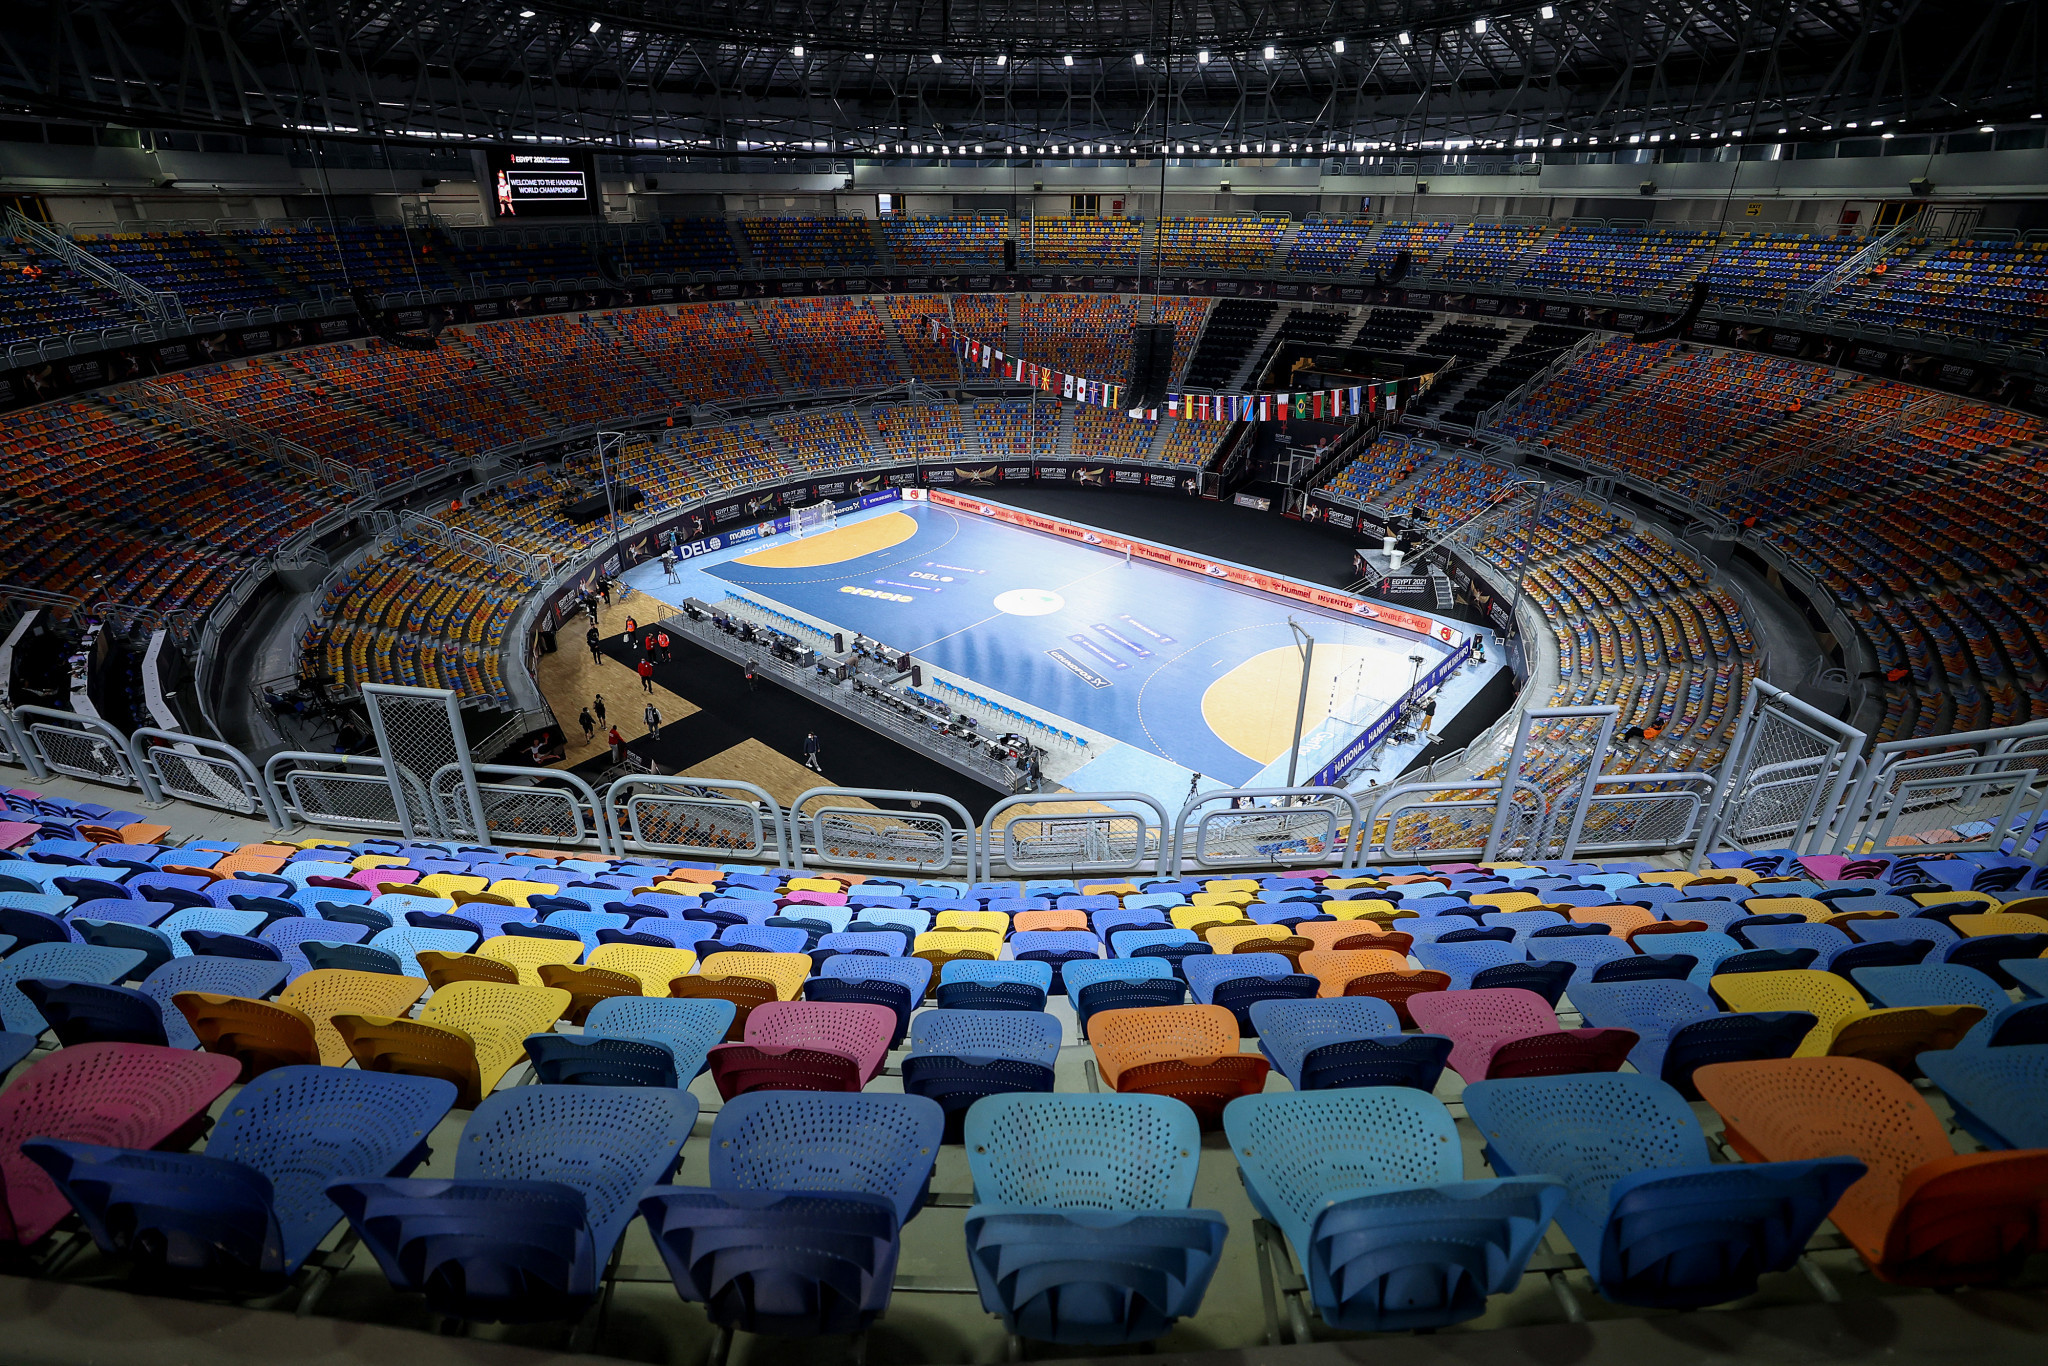 Cairo Stadium's indoor arena is set to host the African Muaythai Championships from November 11 to 14 ©Getty Images